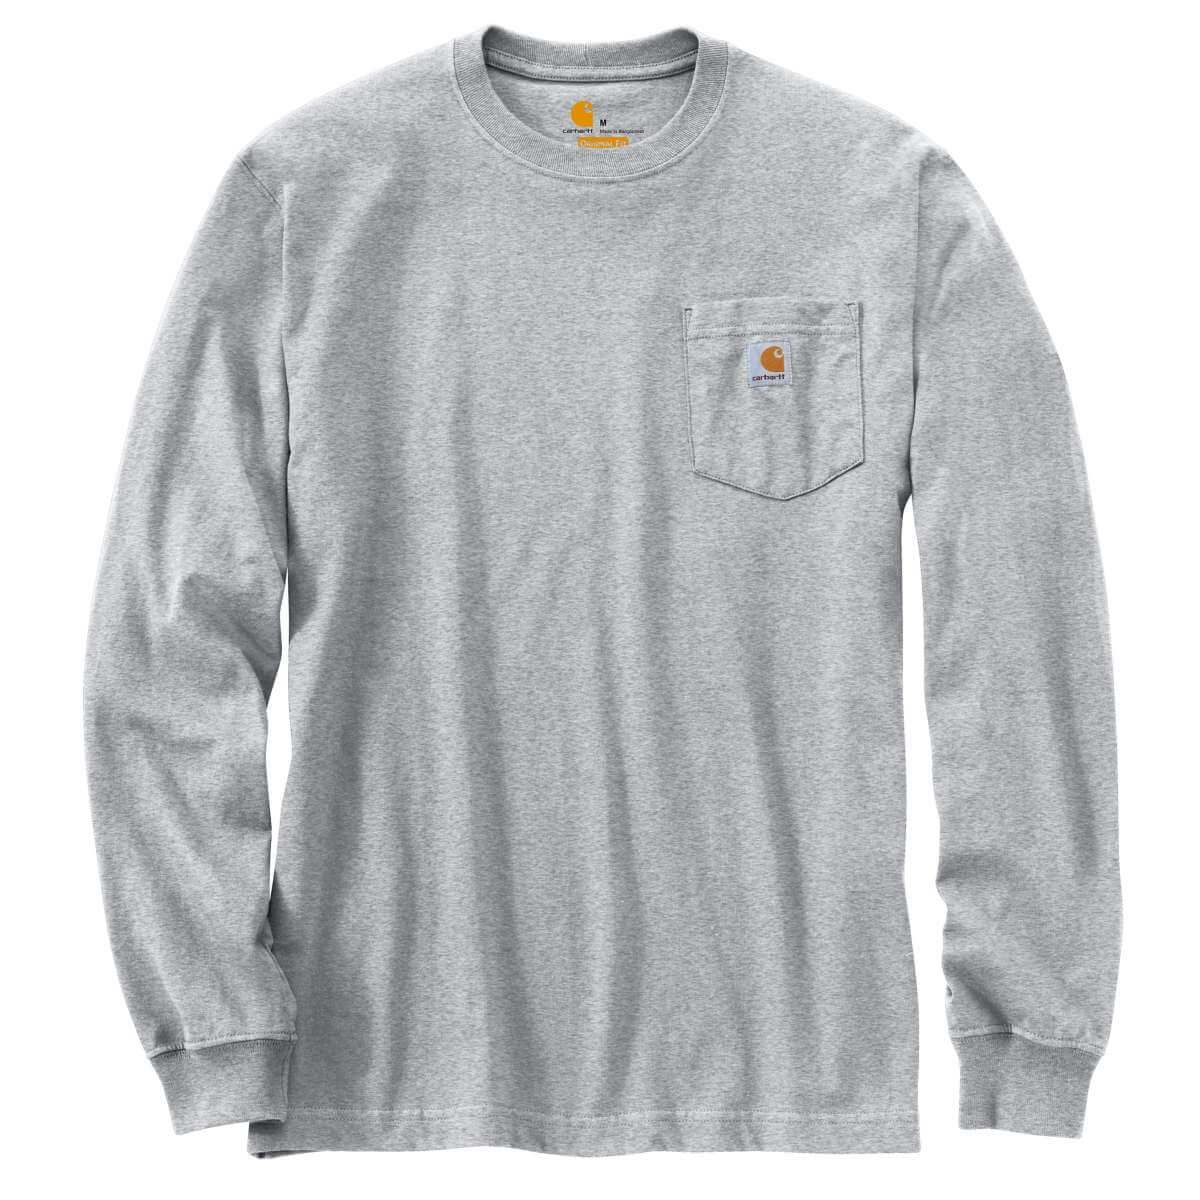  Loose Fit Heavyweight Long-Sleeve Pocket T-Shirt Heather Grey HGY